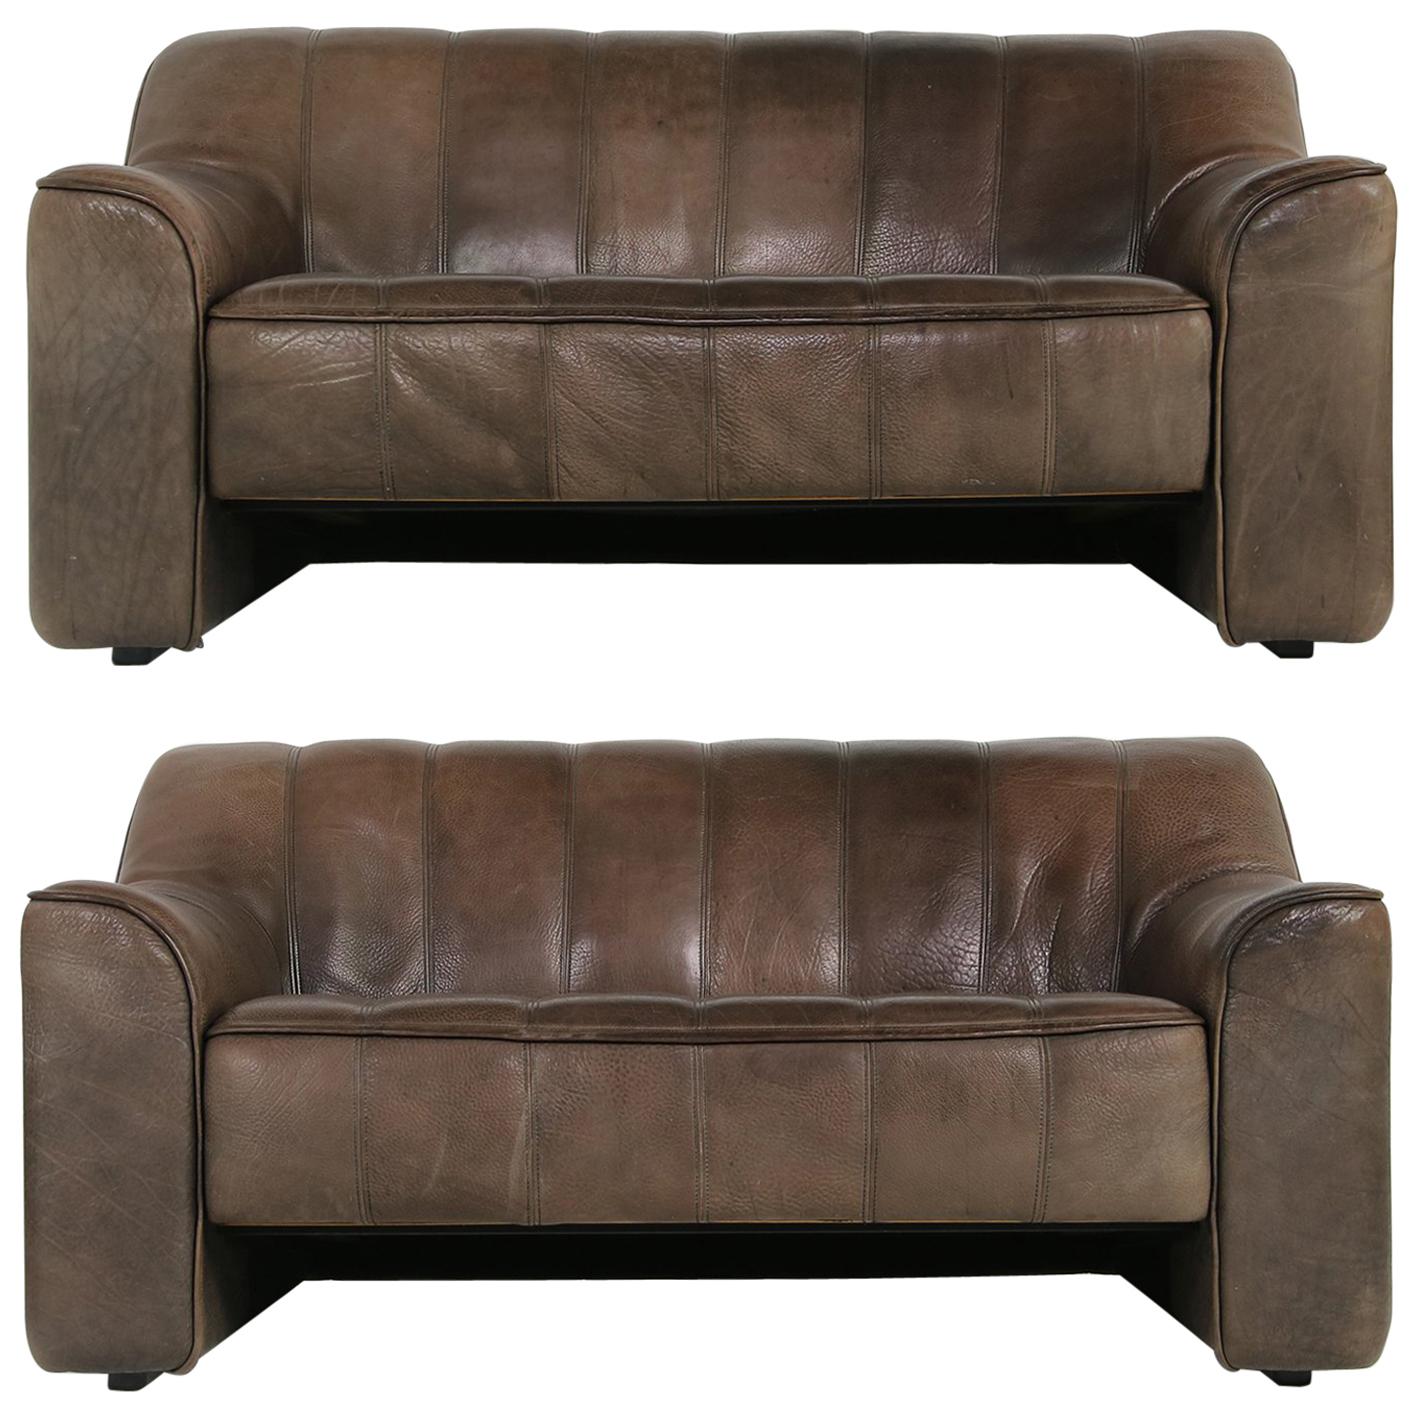 Pair of 1970s Vintage De Sede DS 44 Two-Seat Buffalo Leather Sofas, Brown